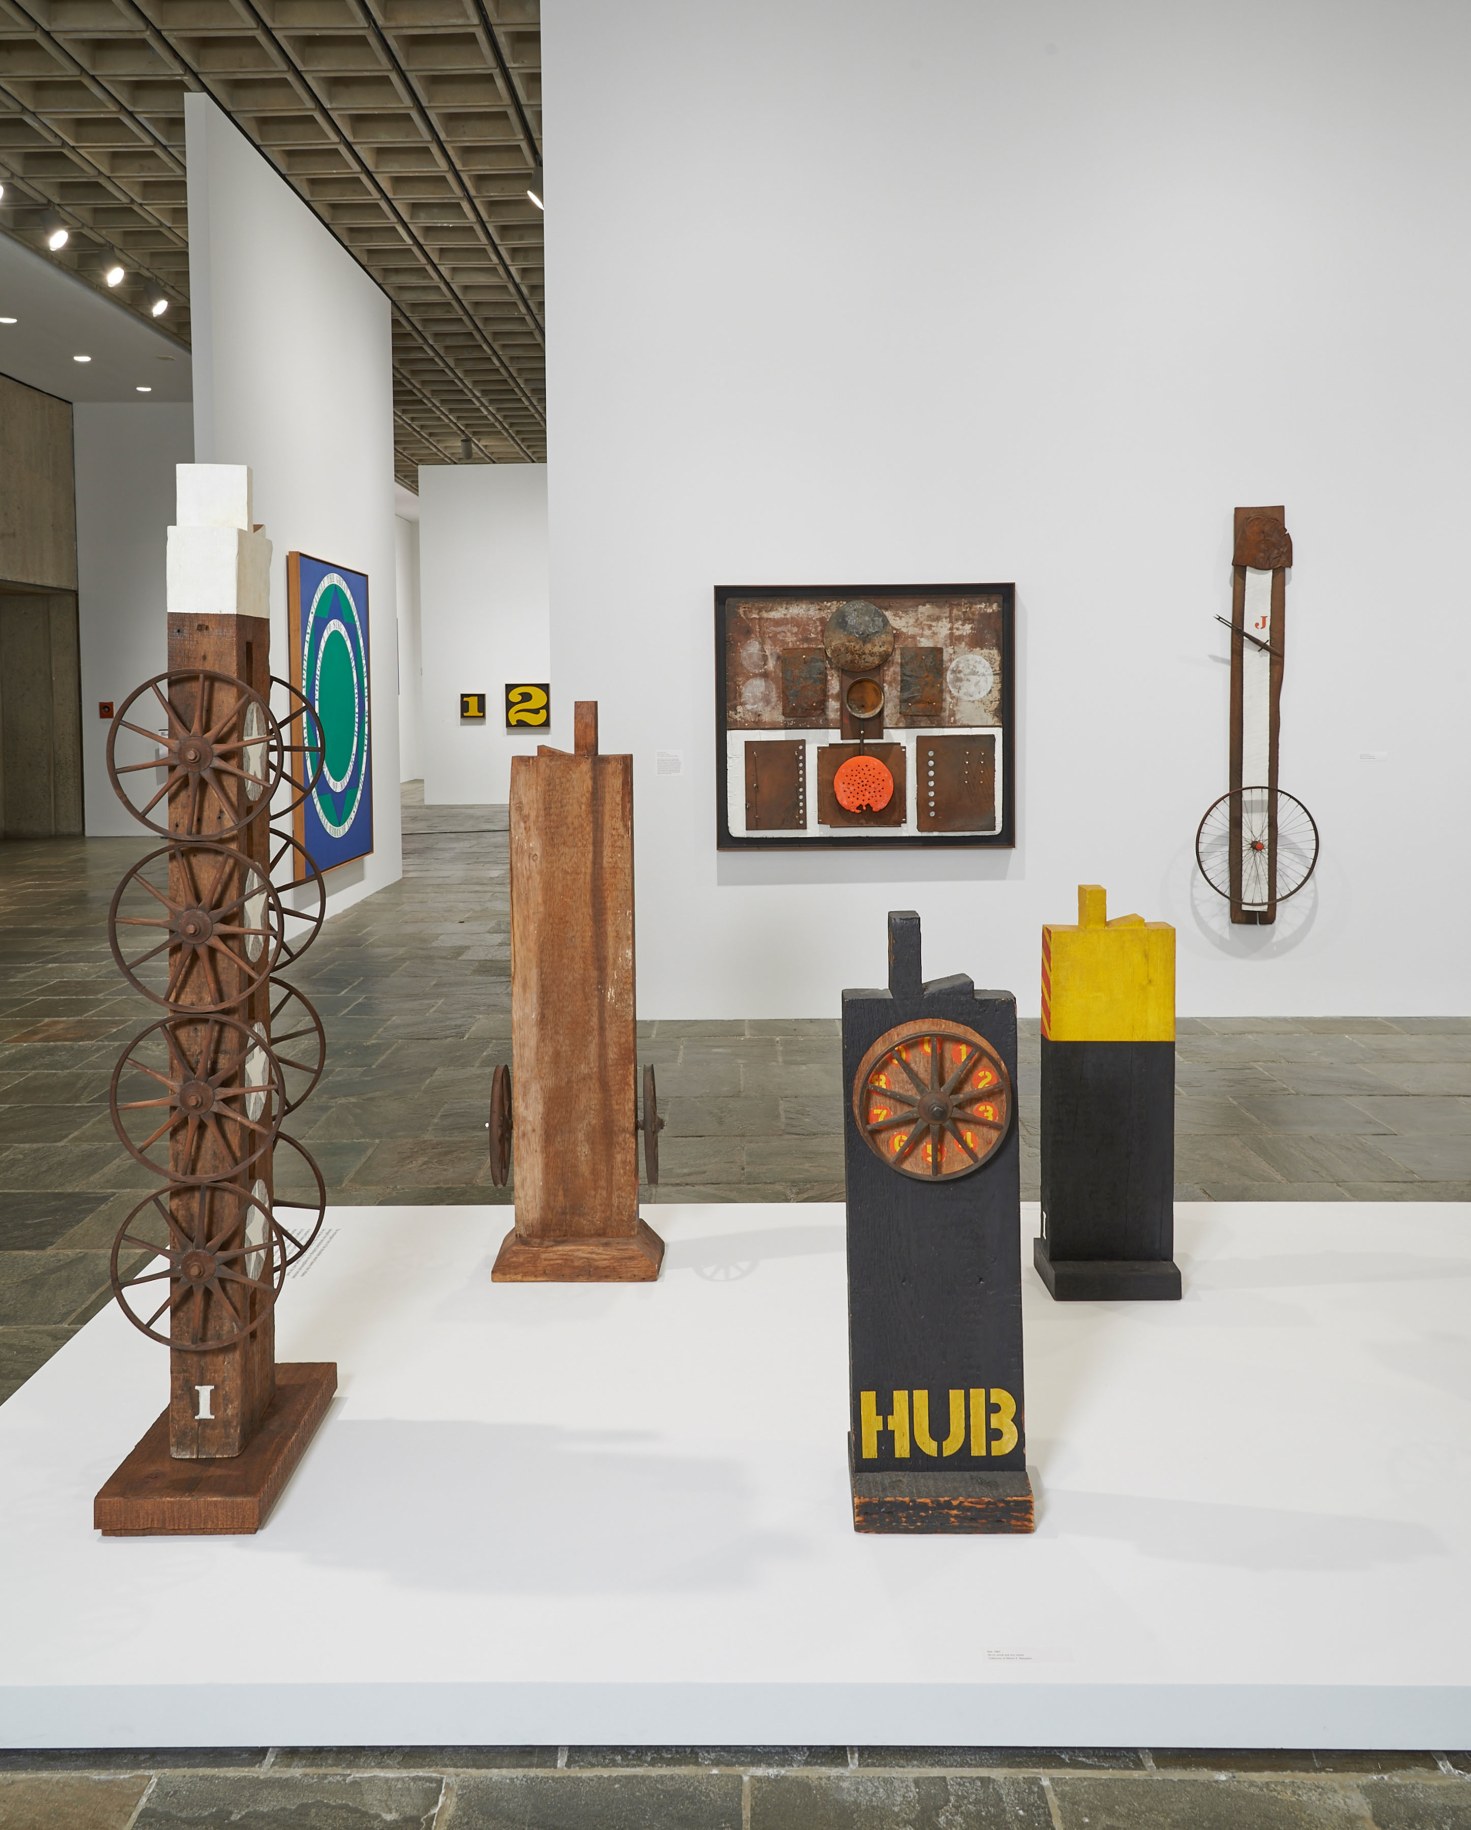 Installation view of&nbsp;Robert Indiana: Beyond LOVE, Whitney Museum of American Art, New York, September 26, 2013&ndash;January 5, 2014, with Jeanne d&rsquo;Arc (1960&ndash;62) hanging on the far right. Photo: Tom Powel Imaging